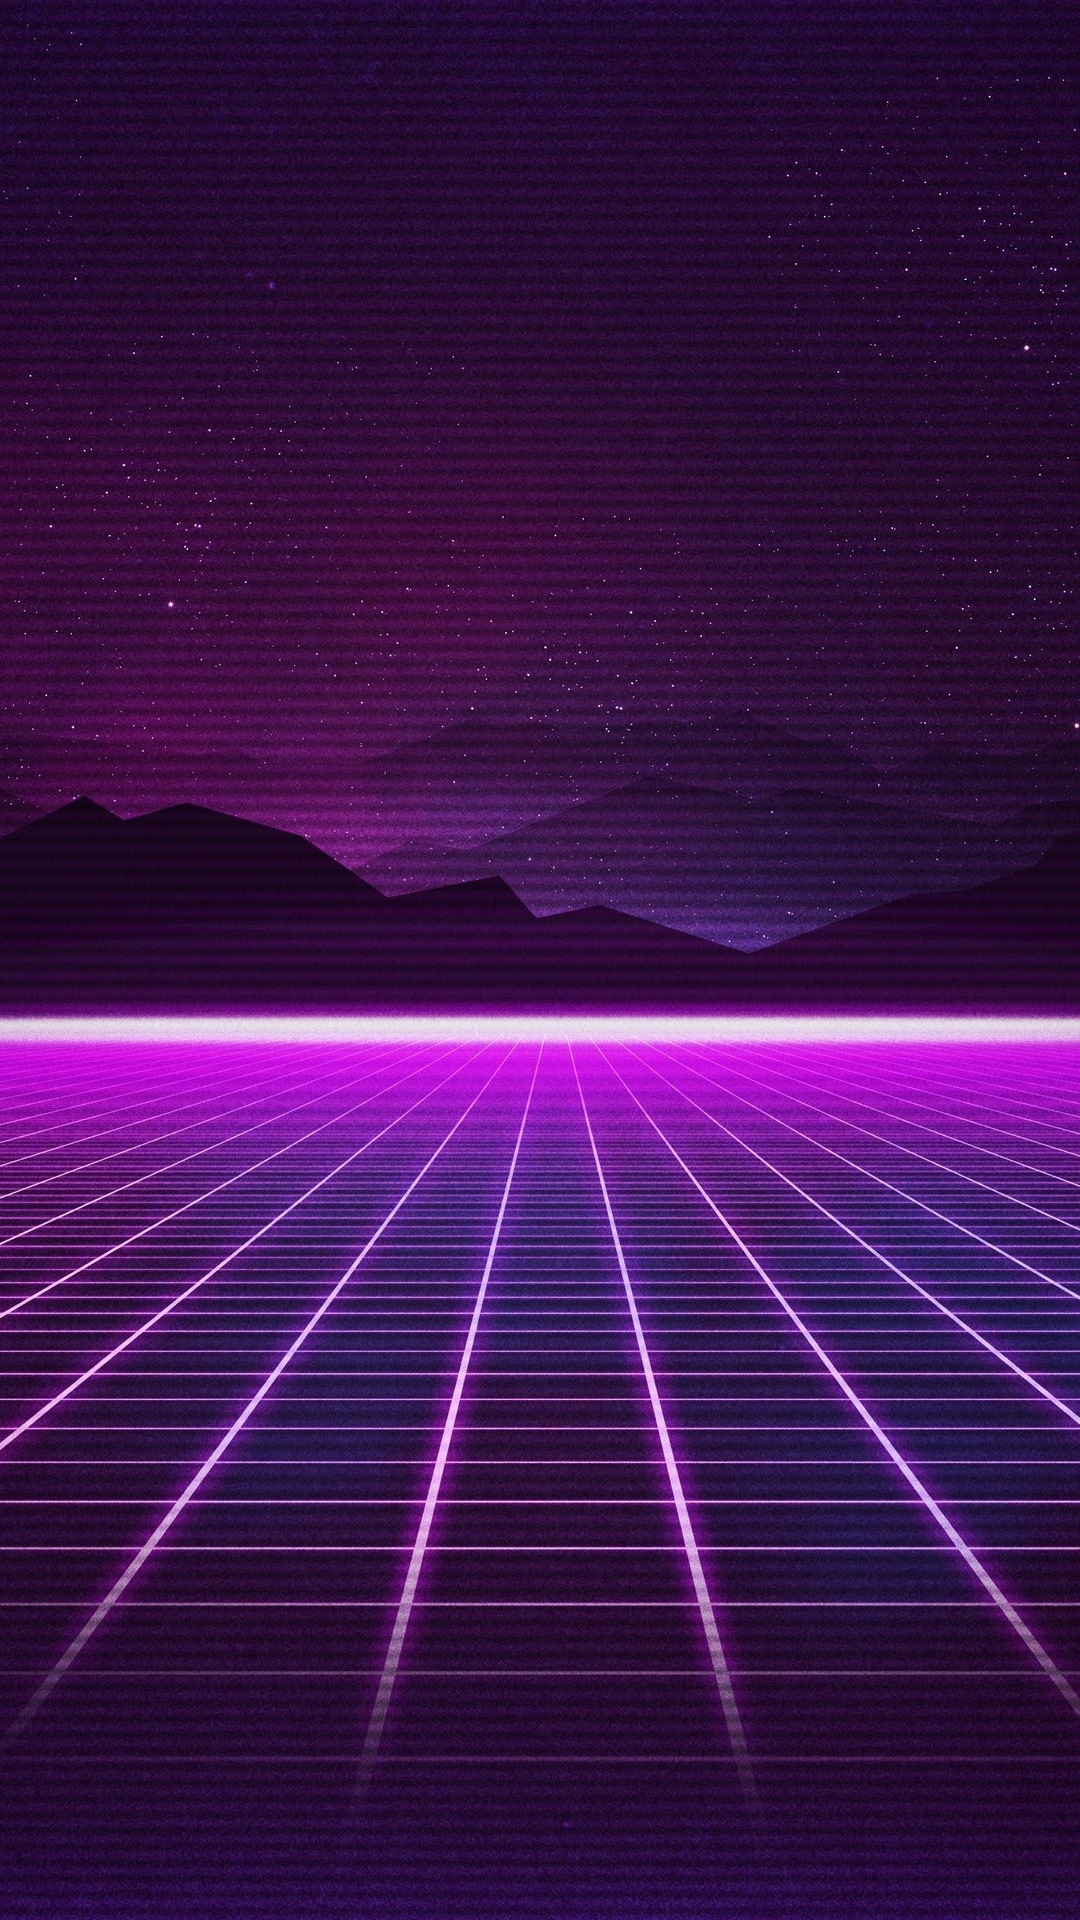 A retro 80s style purple background with lines - Magenta, grid